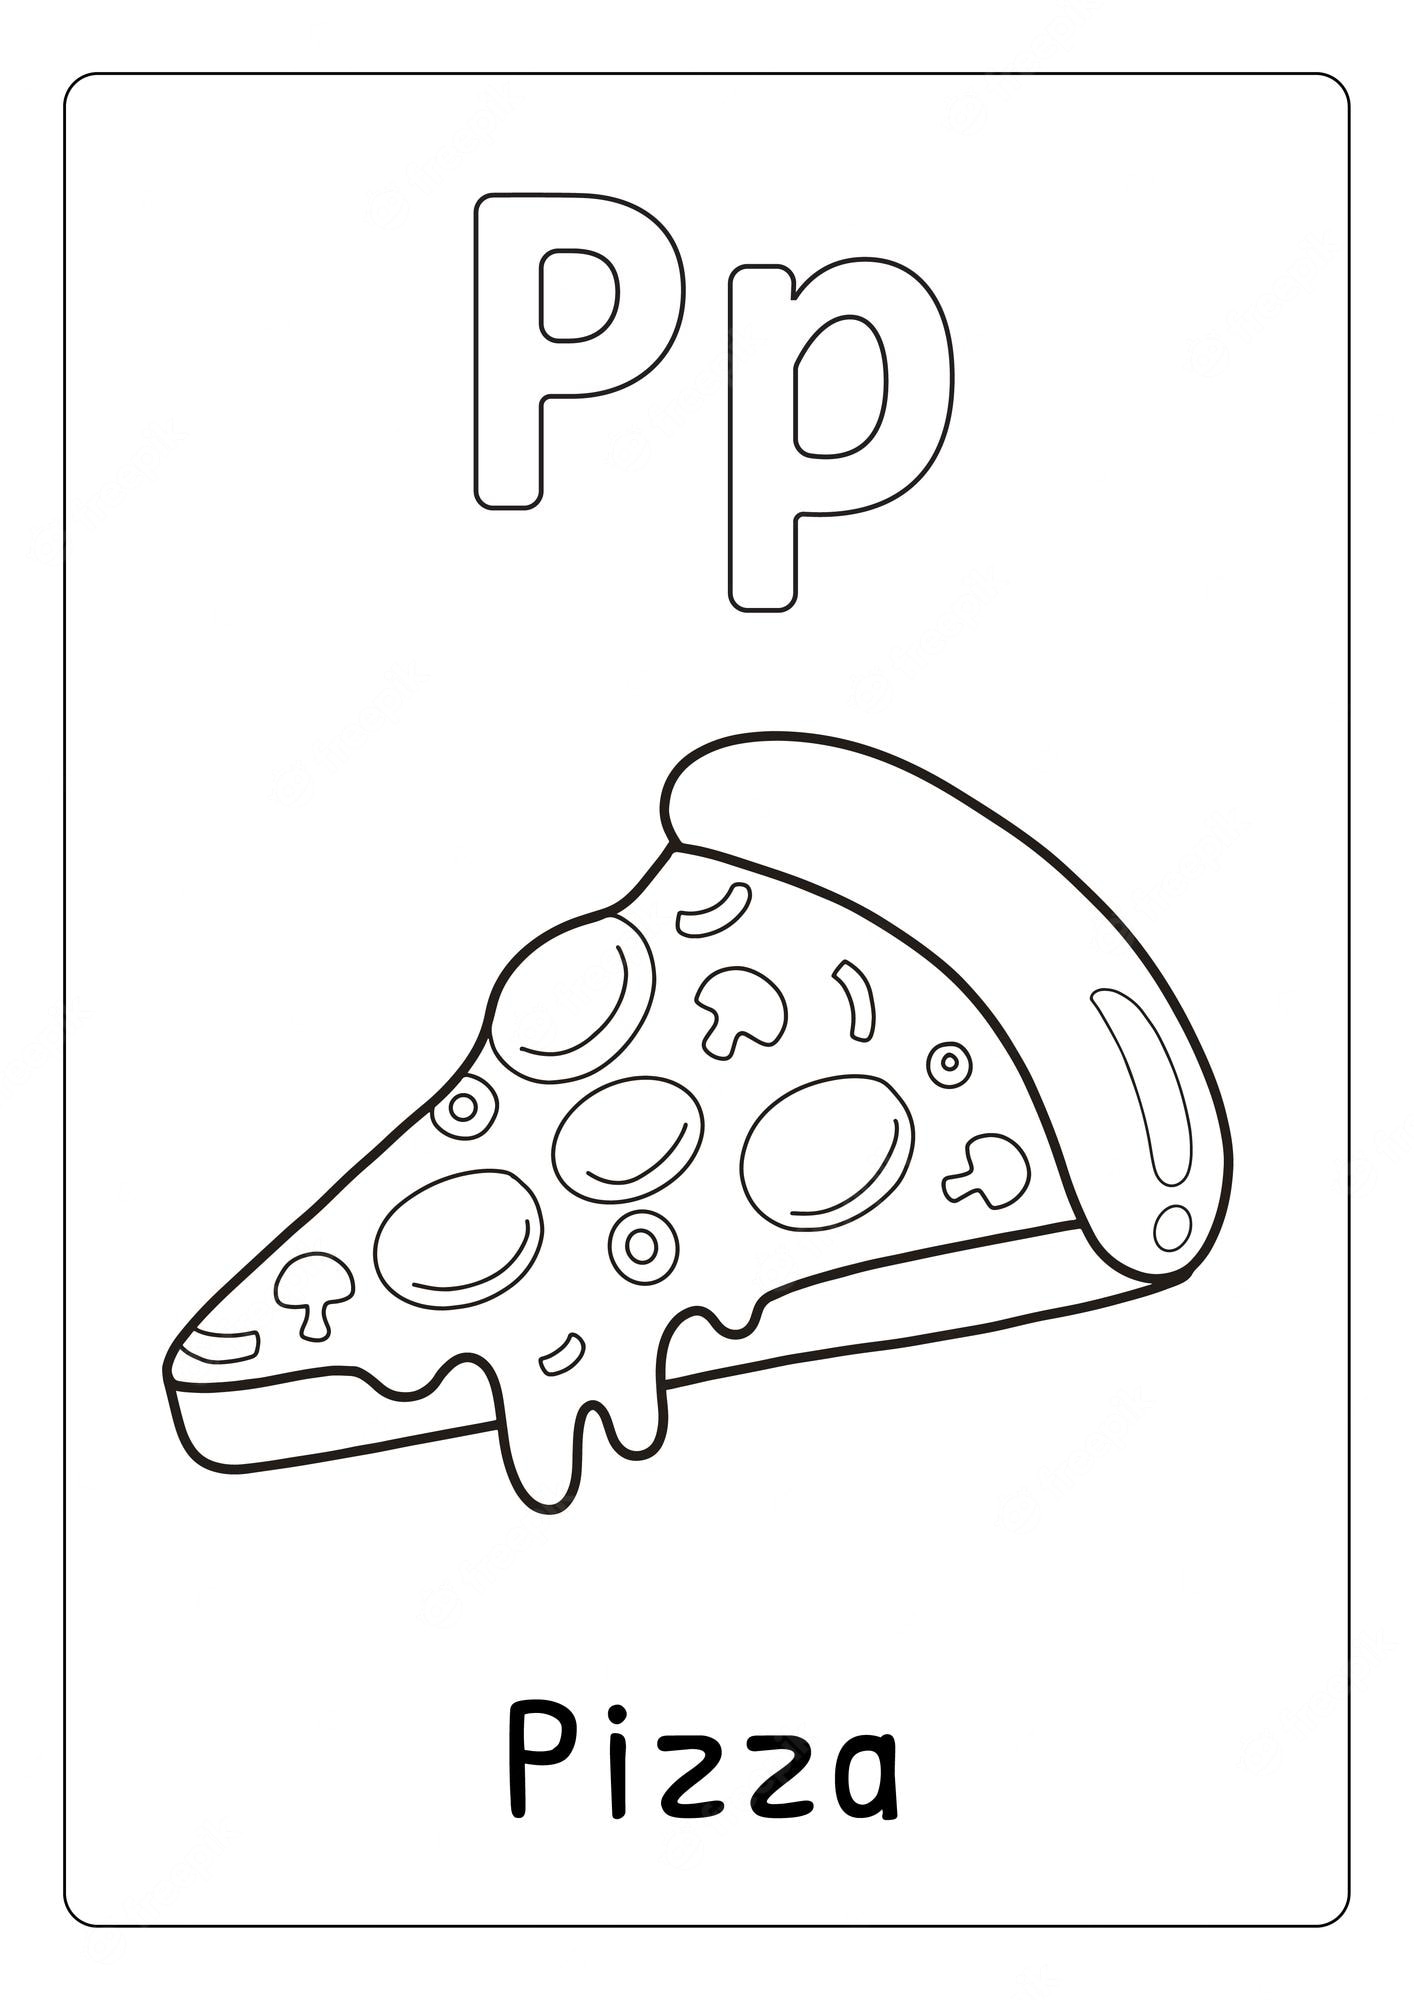 Premium Vector | Alphabet letter p for pizza coloring page for kids